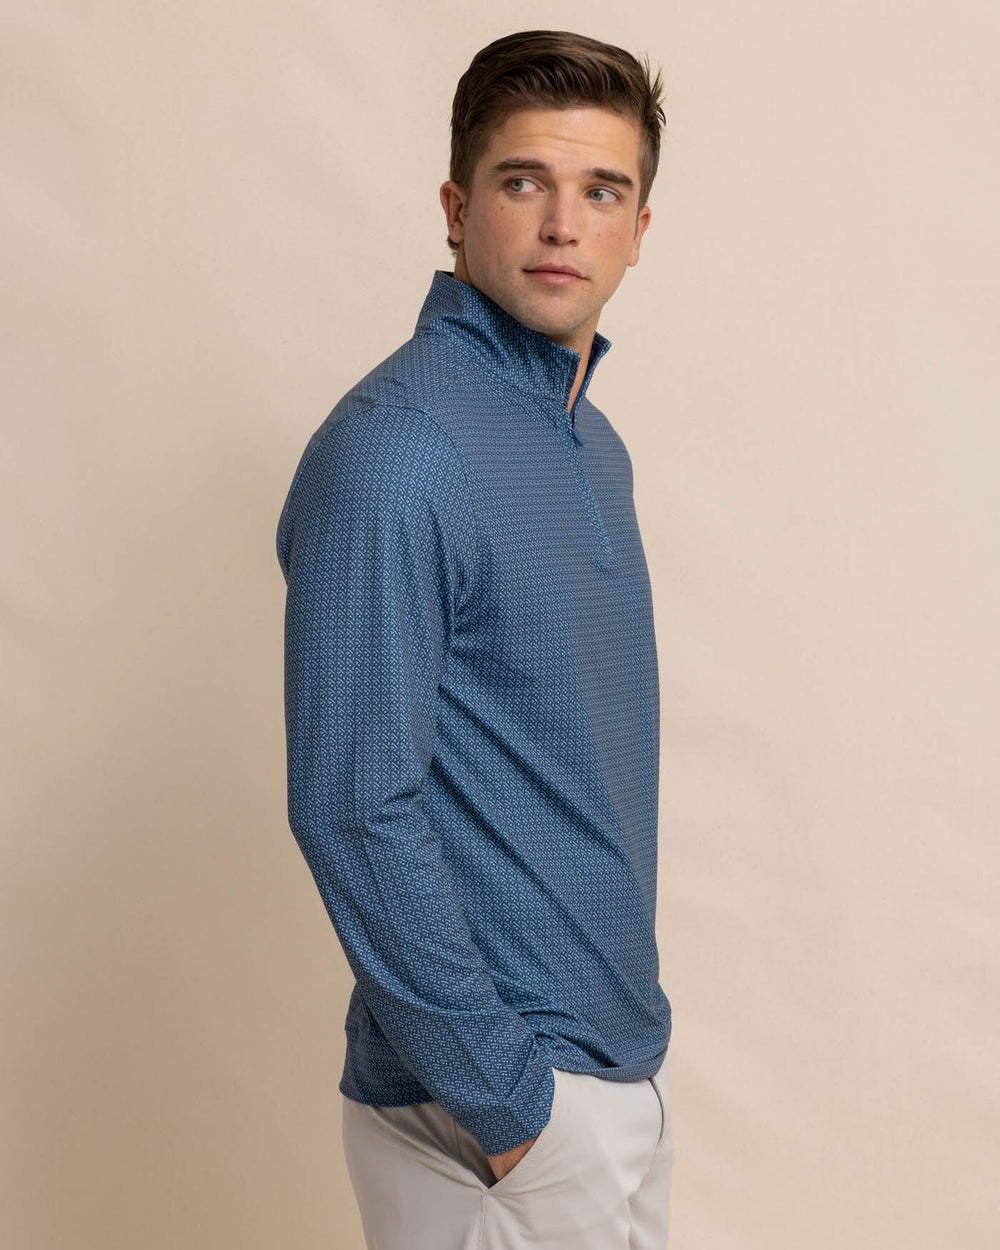 The front view of the Southern Tide Clubbin It Print Cruiser Quarter Zip by Southern Tide - Aged Denim